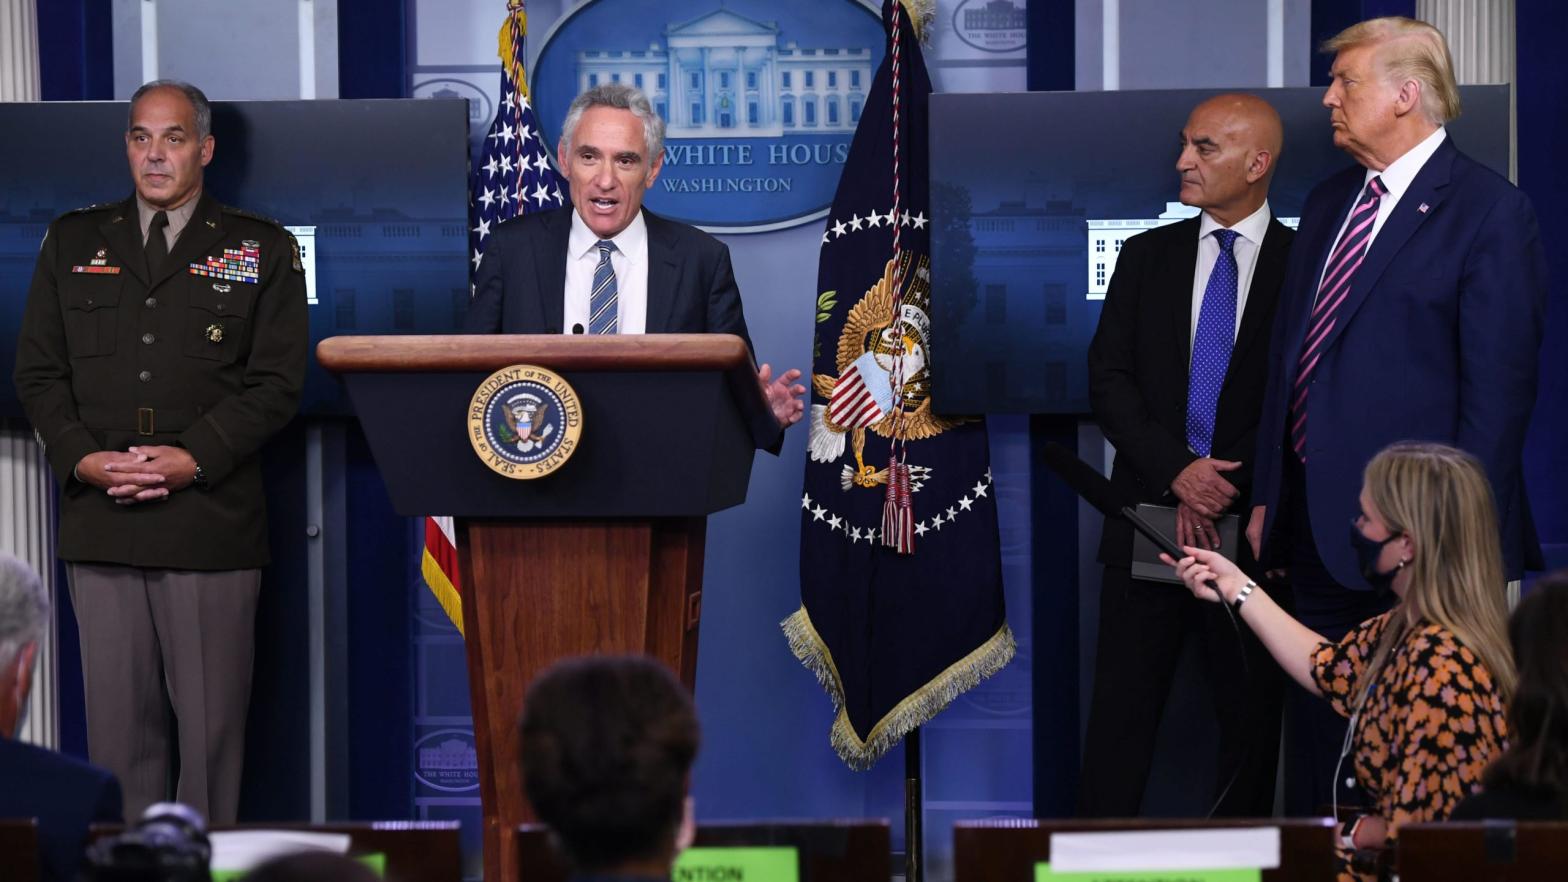 Dr. Scott Atlas, a member of the federal coronavirus task force, speaks during a press conference at the White House in Washington, DC, September 18, 2020. (Photo: Saul Loeb, Getty Images)